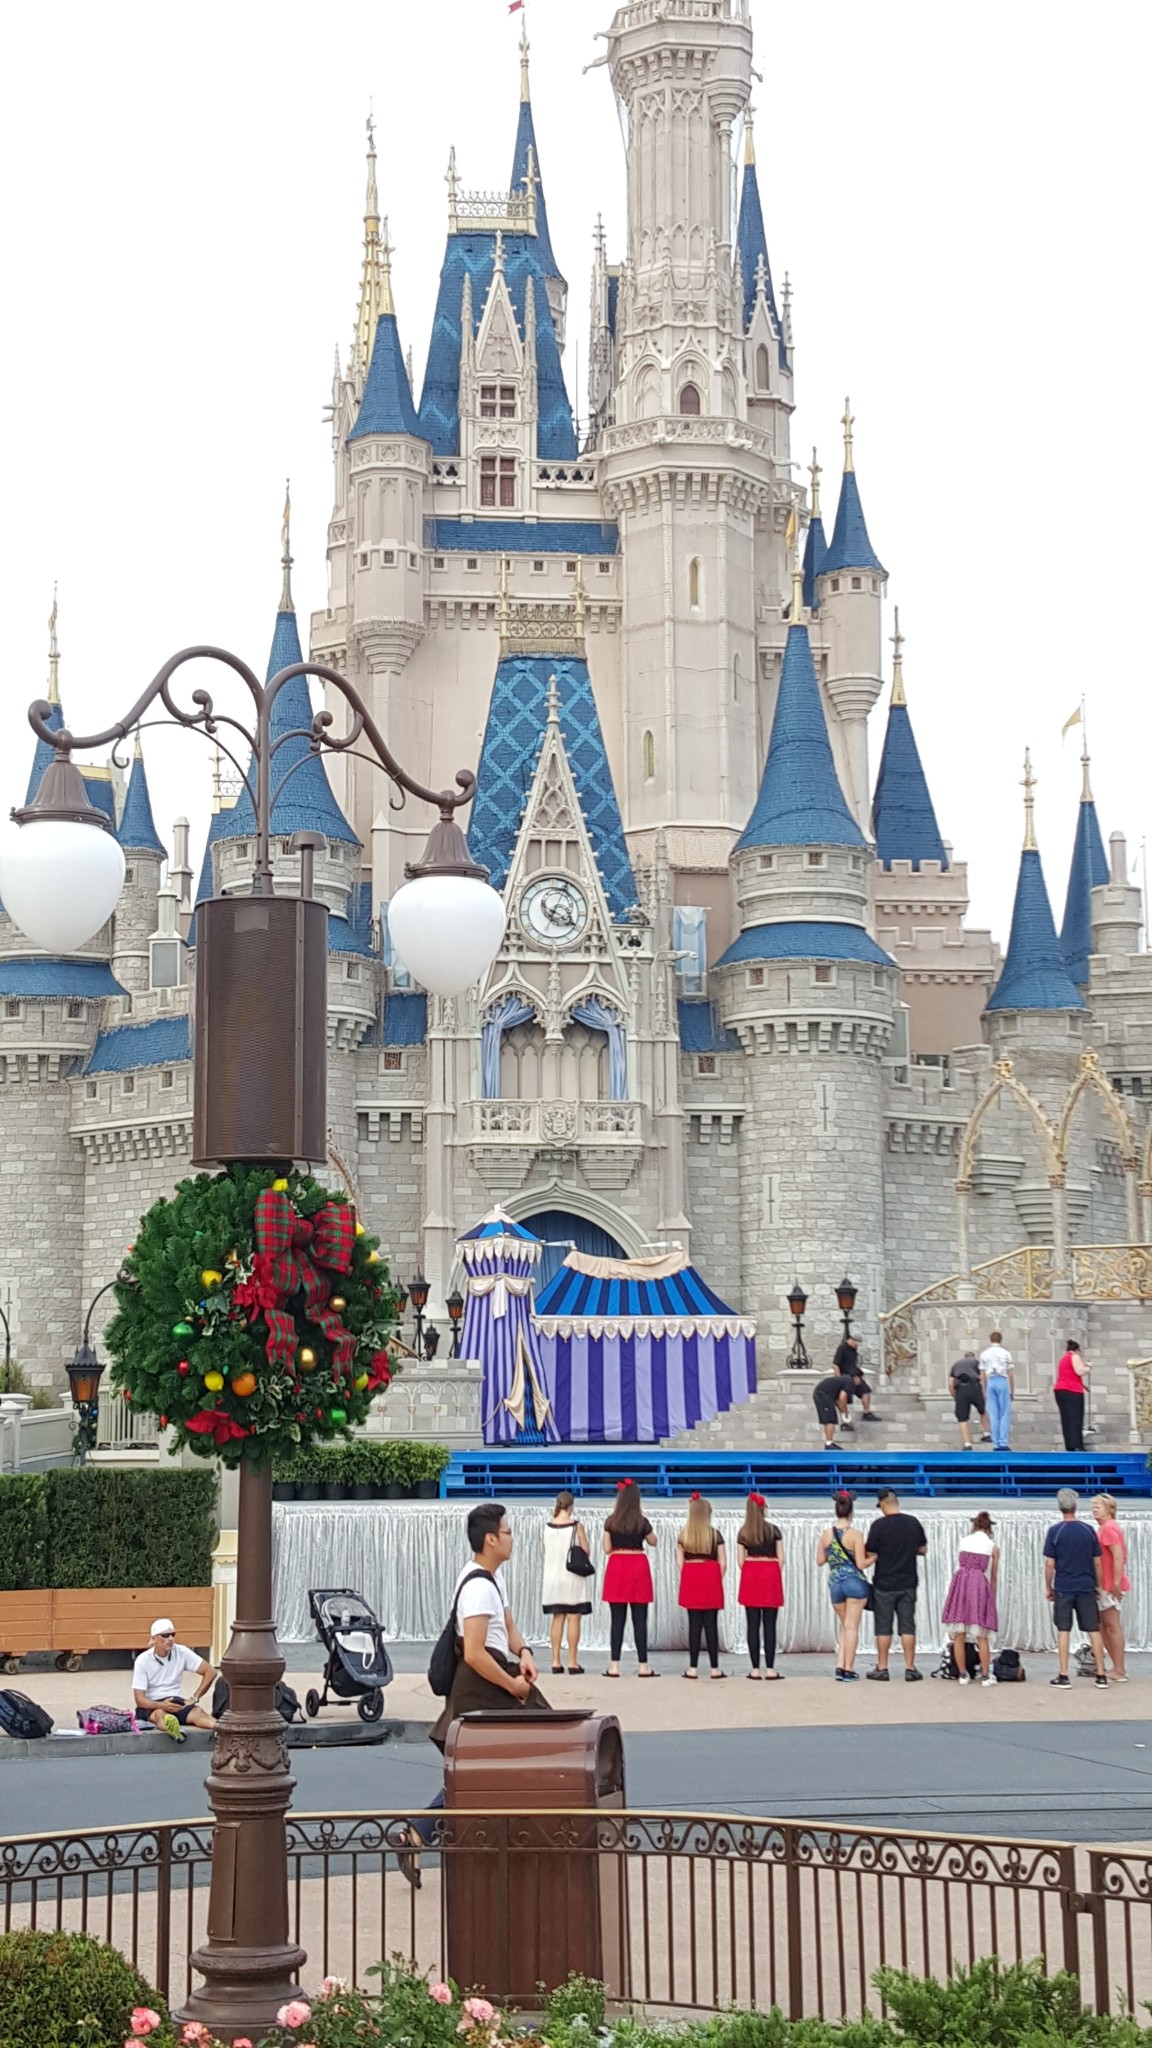 Magic Kingdom moves and cancels some shows due to taping of Disney Parks Christmas Day Parade